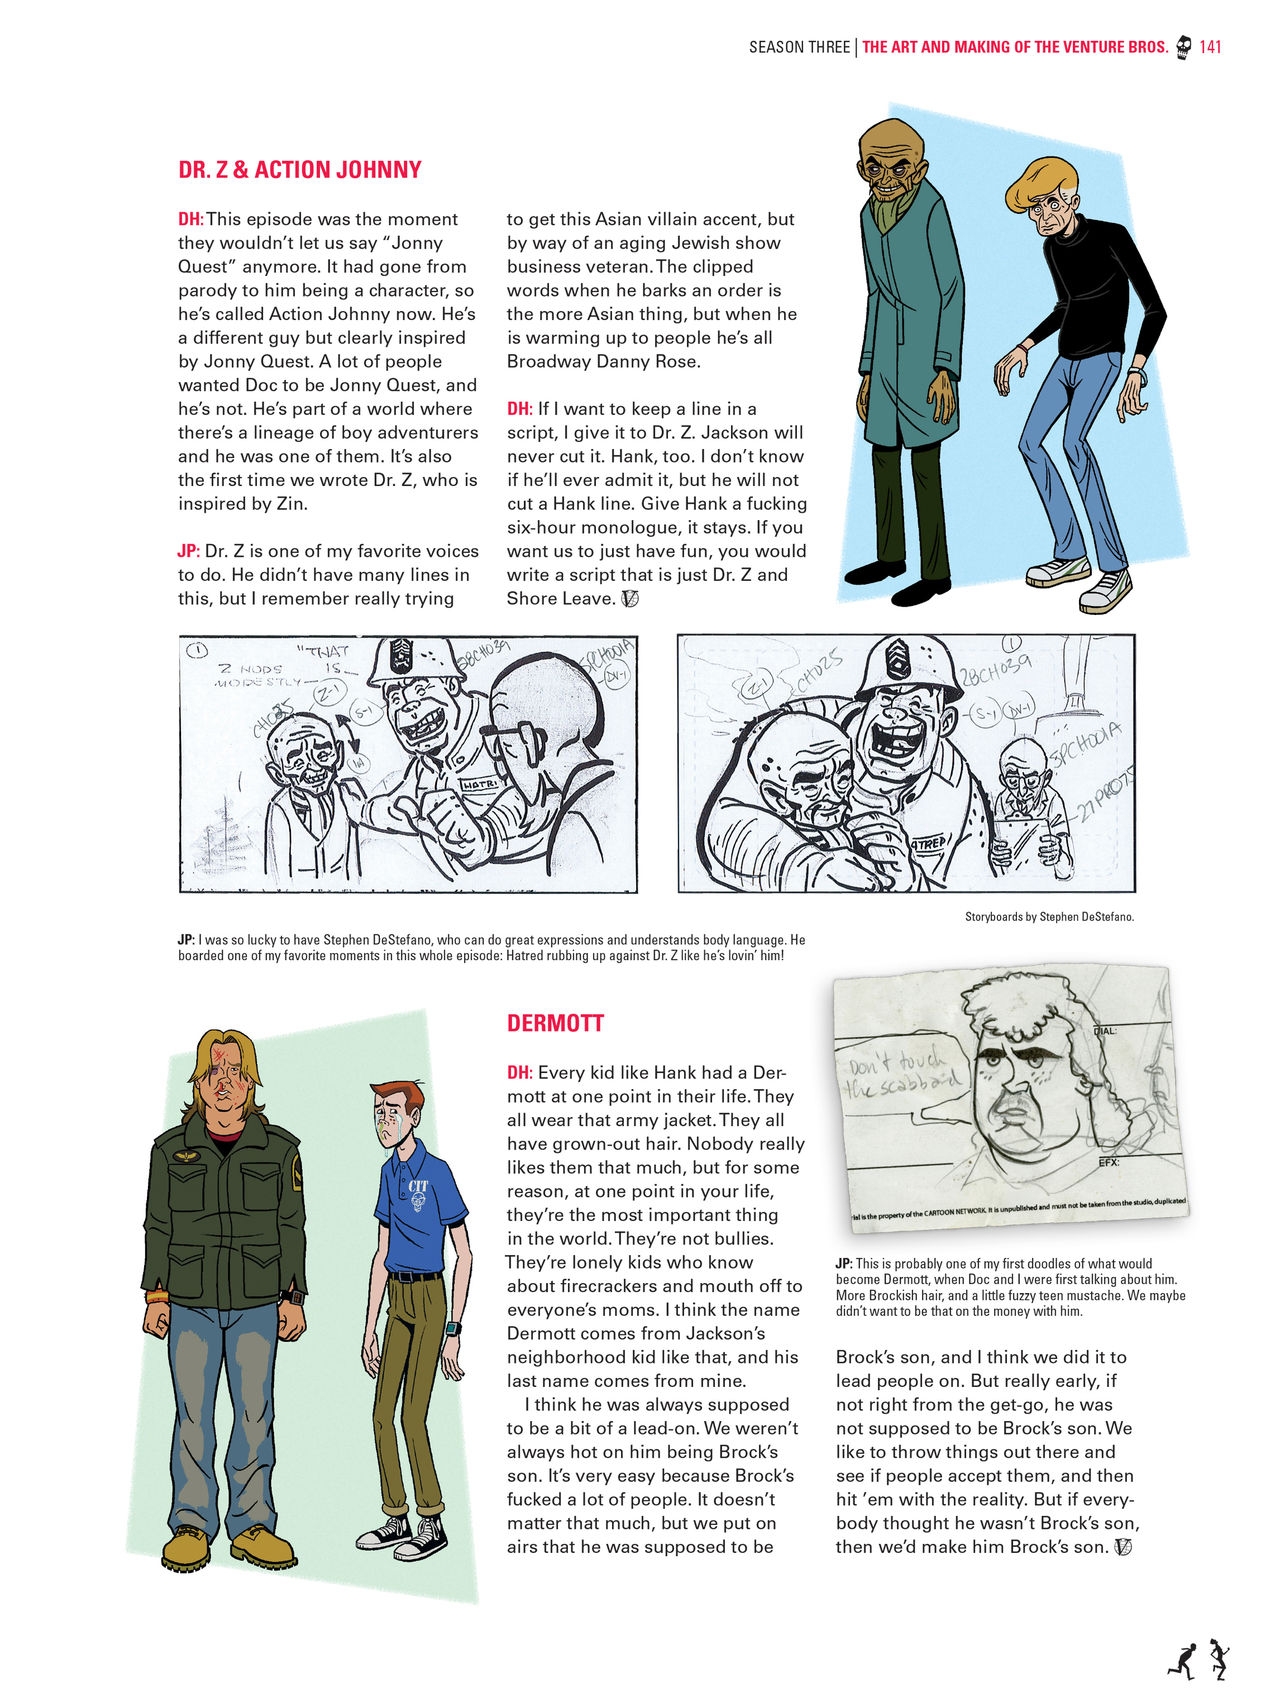 Go Team Venture! - The Art and Making of the Venture Bros 139